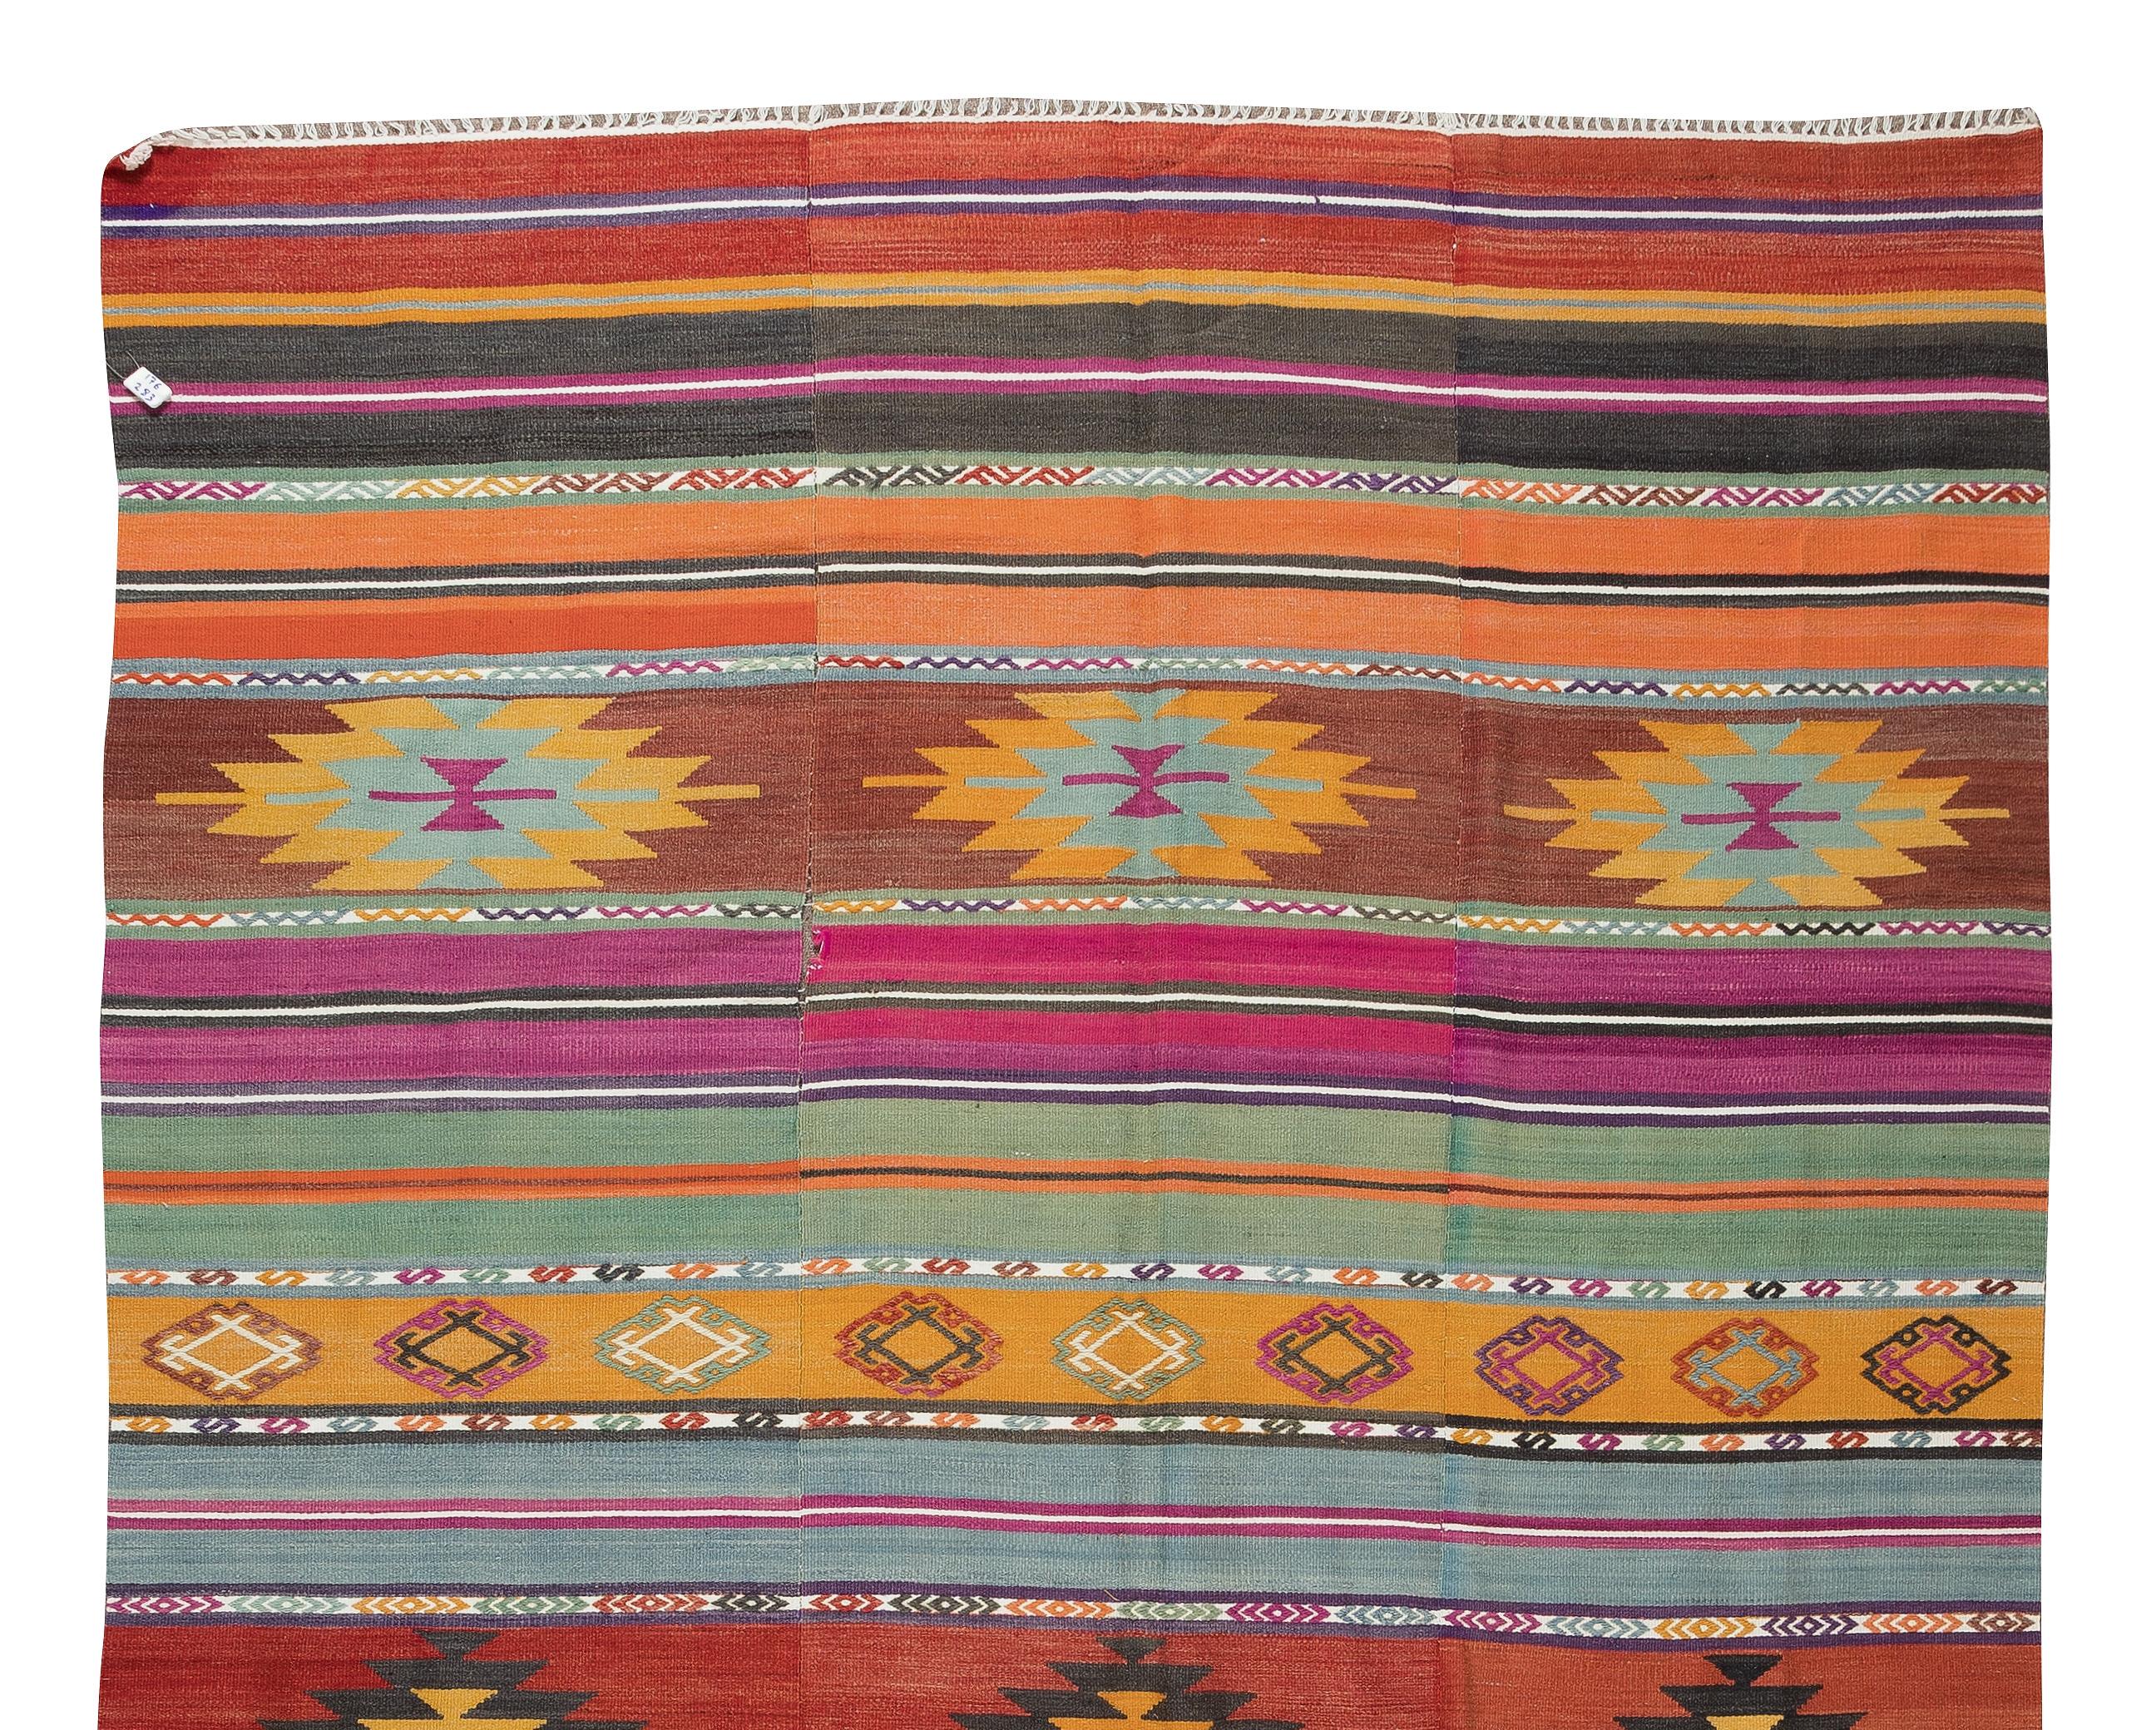 5.8x9.3 Ft Vintage Hand Woven Kilim, Colorful Rug, Turkish Carpet, 100% Wool In Good Condition For Sale In Philadelphia, PA